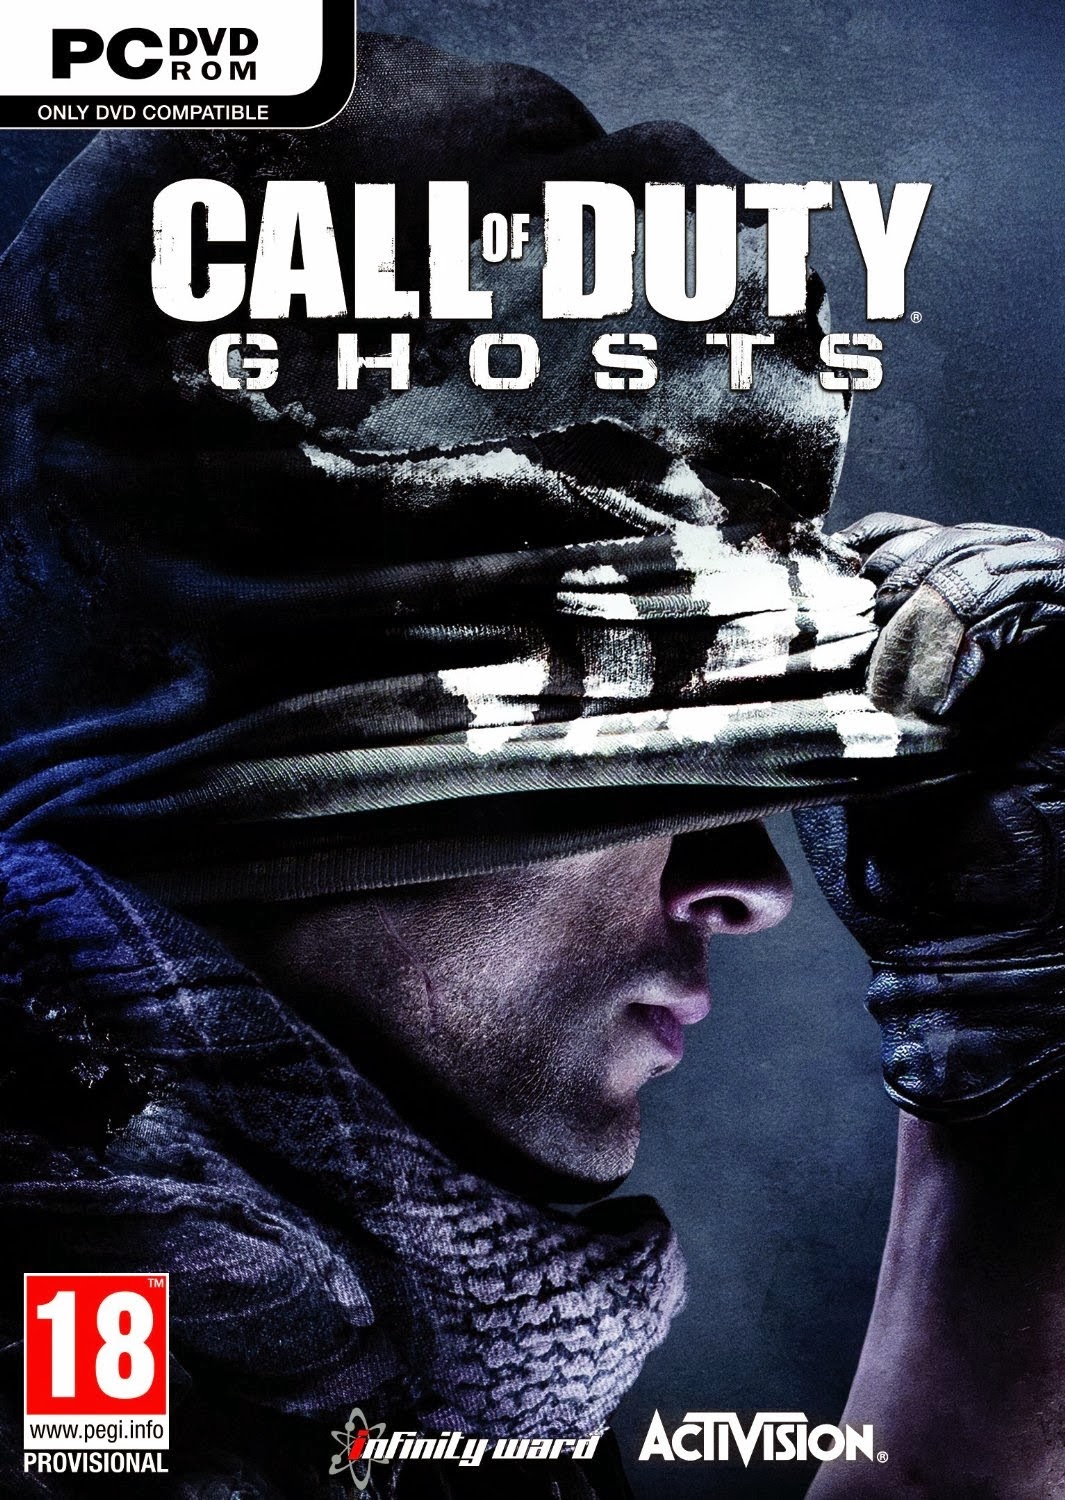 ... .com: Gratis Download Call of Duty : Ghosts PC Game Full Version